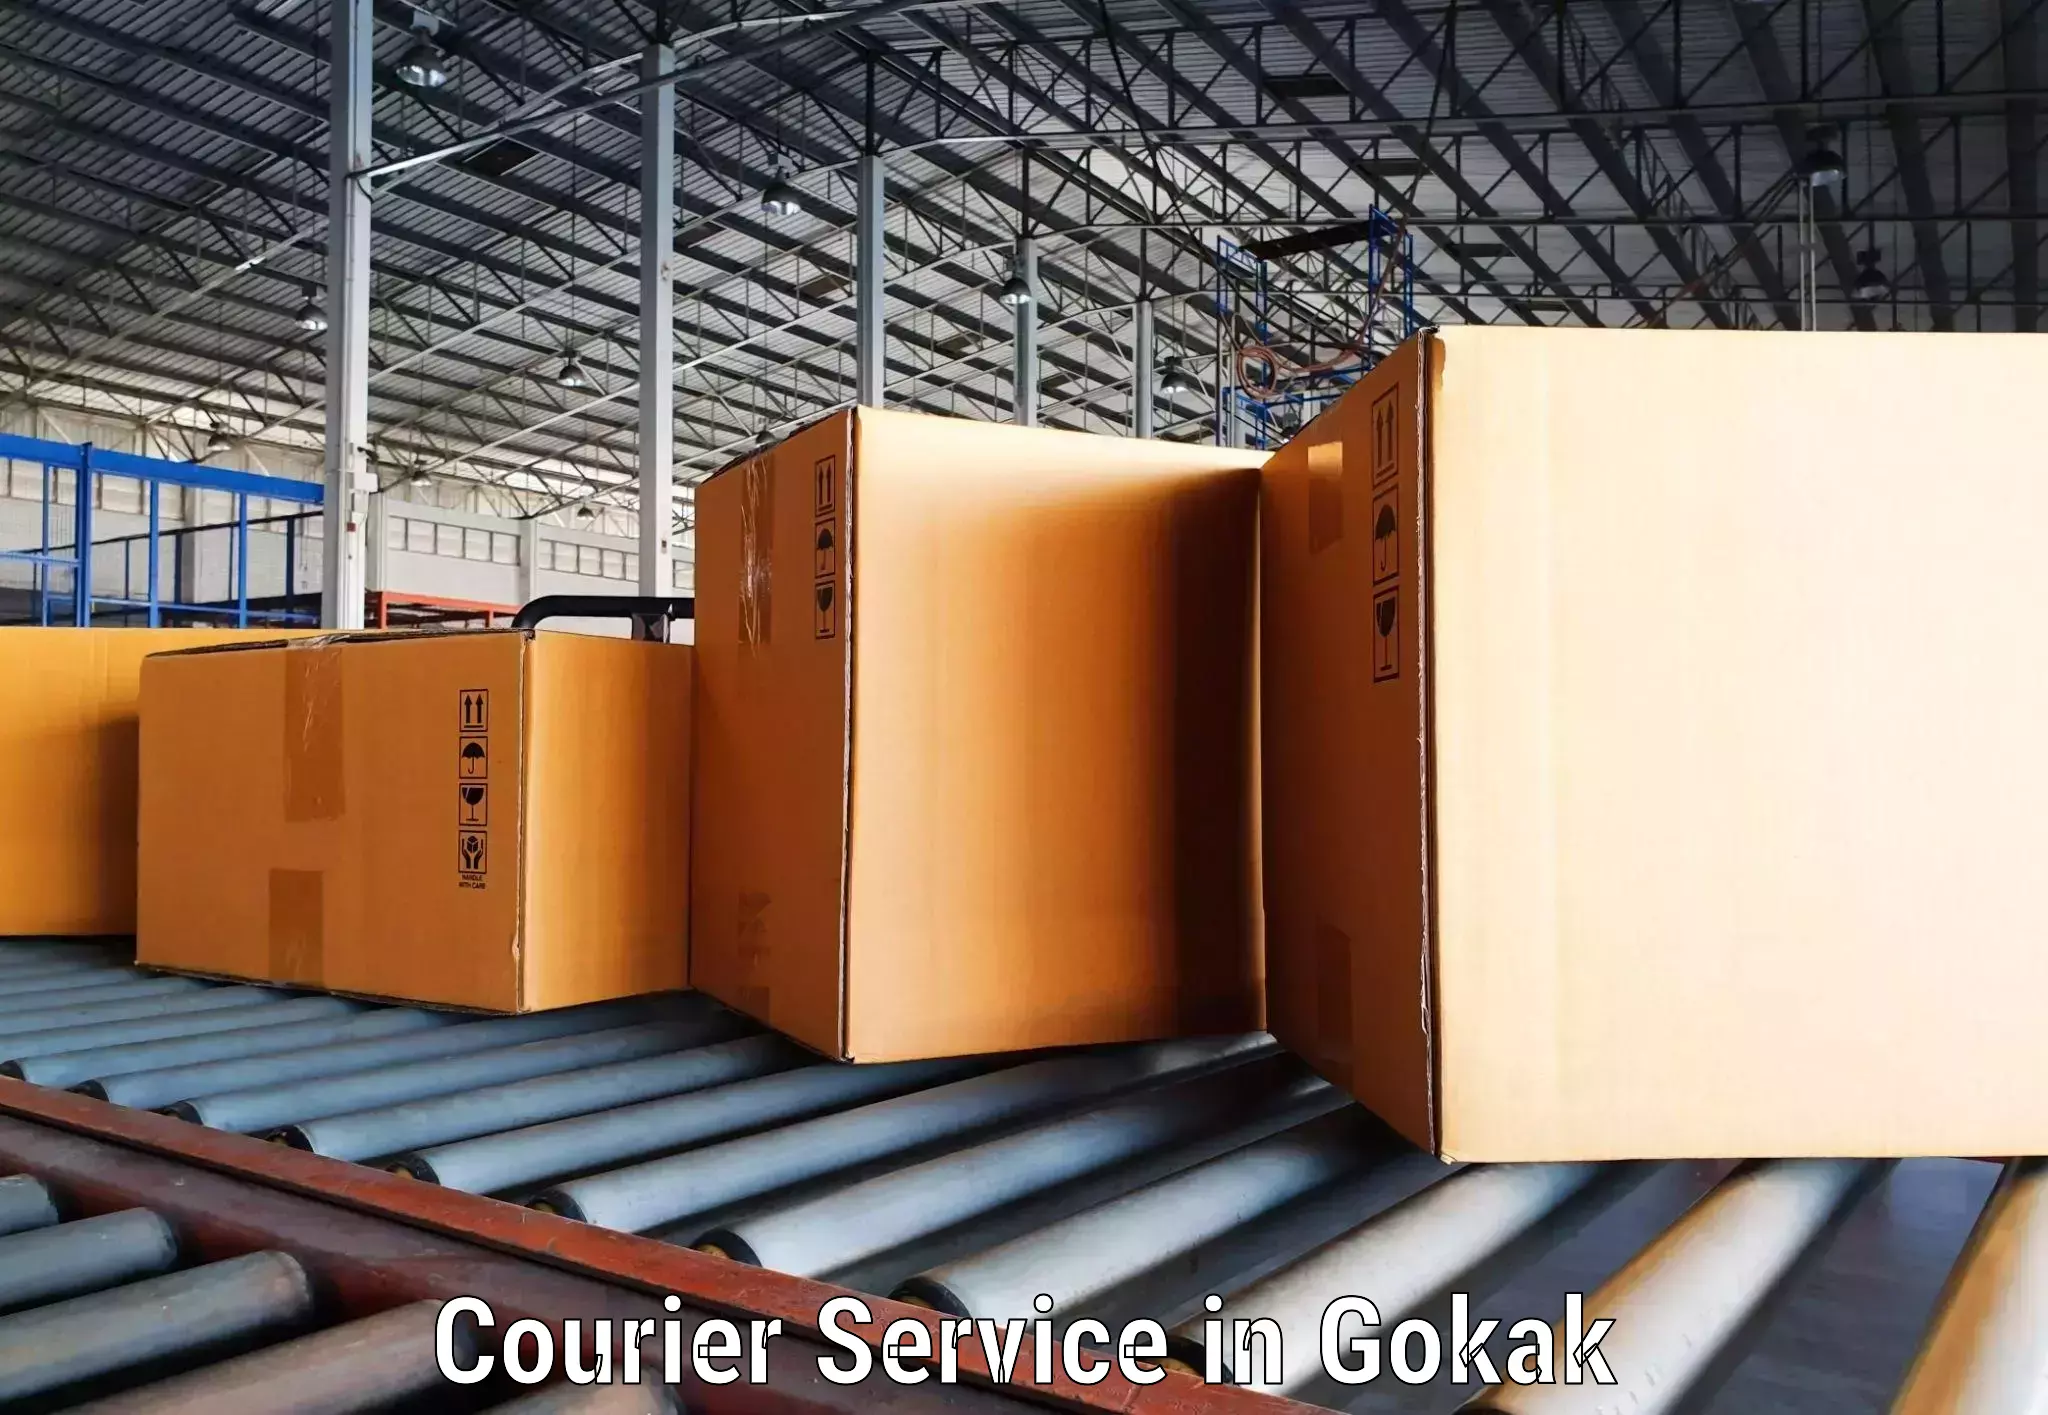 Quality courier partnerships in Gokak